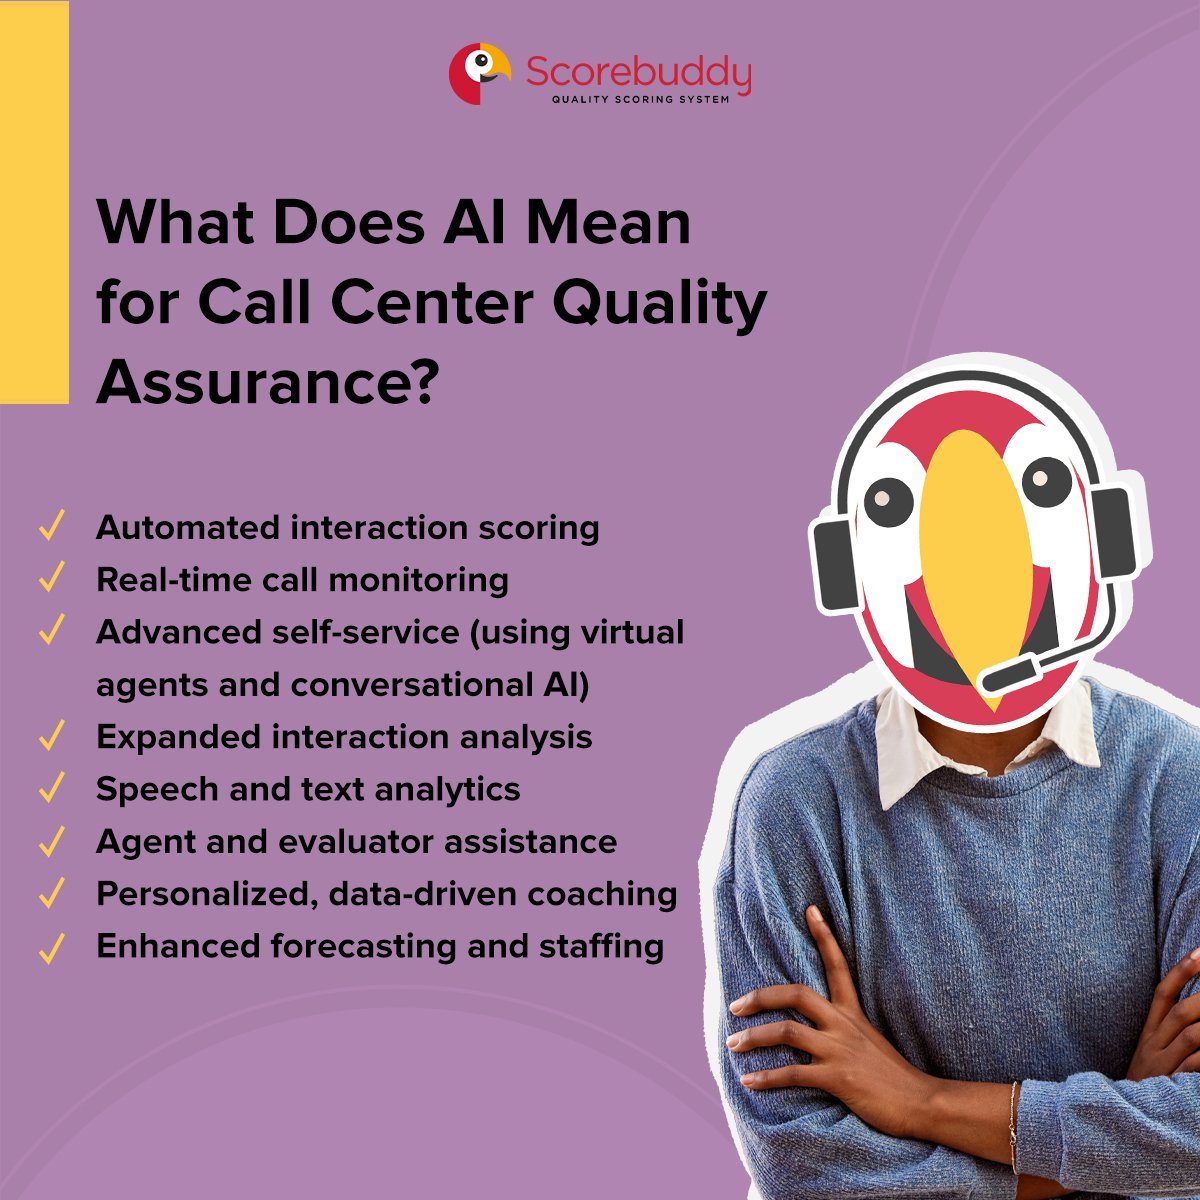 What Does AI Mean for Call Center Quality Assurance